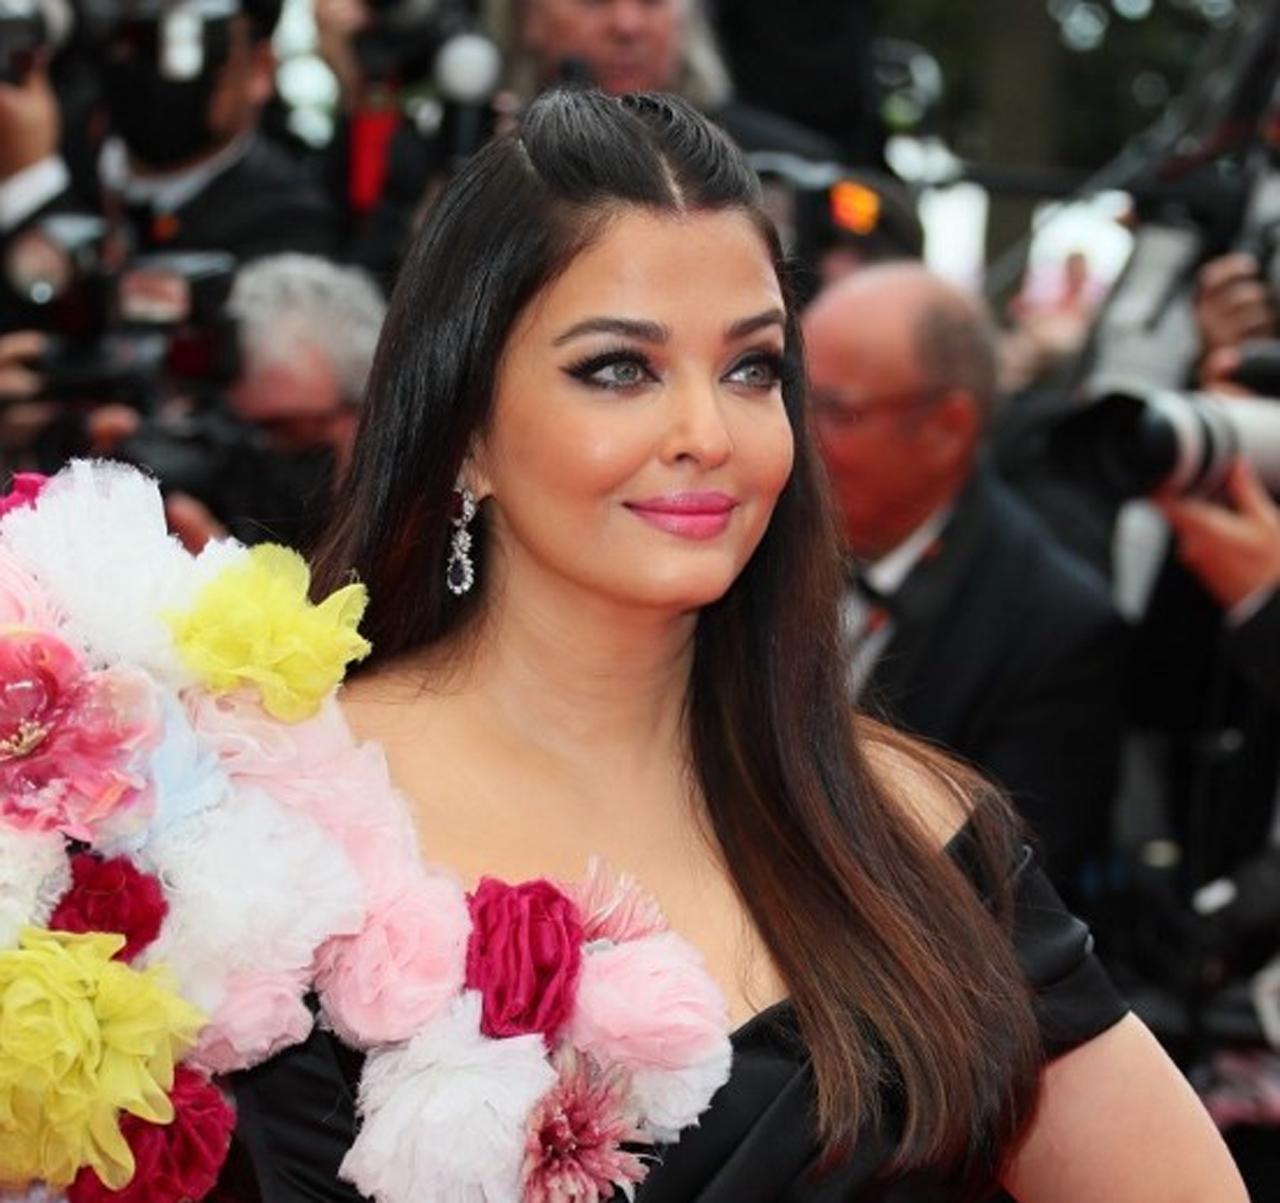 Aishwarya Rai Bachchan turns heads in floral gown at Cannes 2022 Red Carpet  - Articles